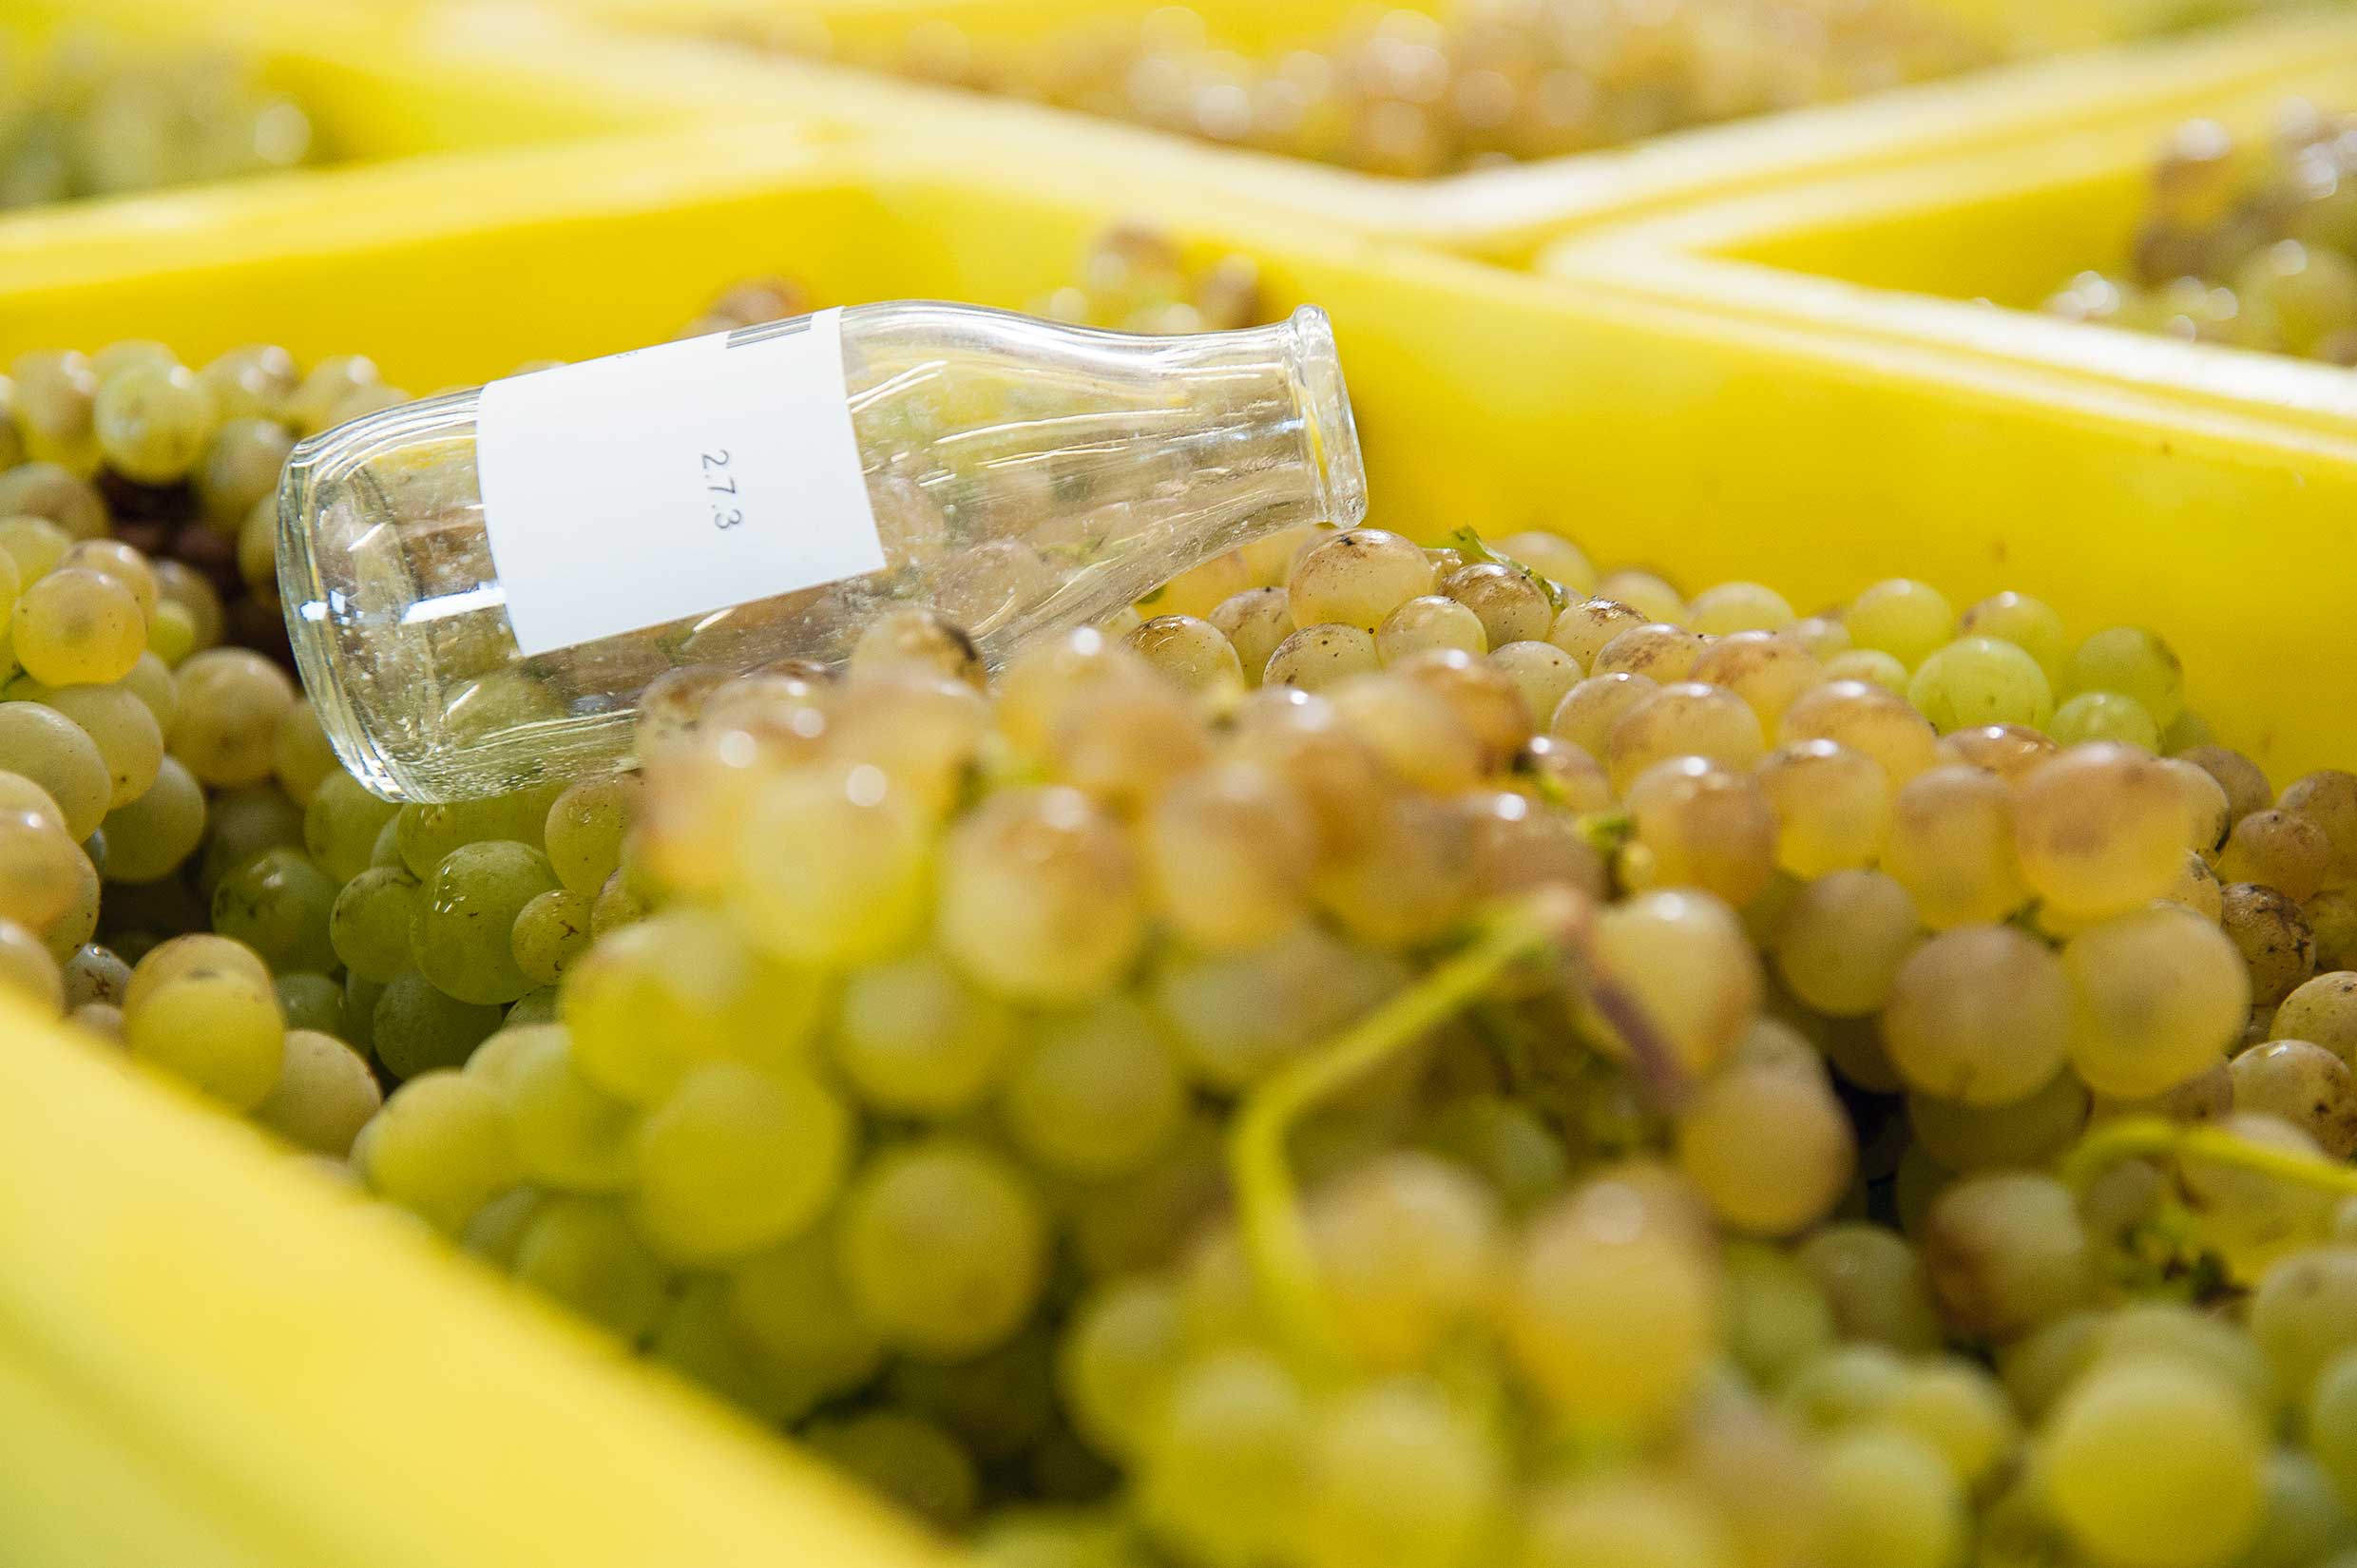 Analytical methods to determine the aroma potential of grapes